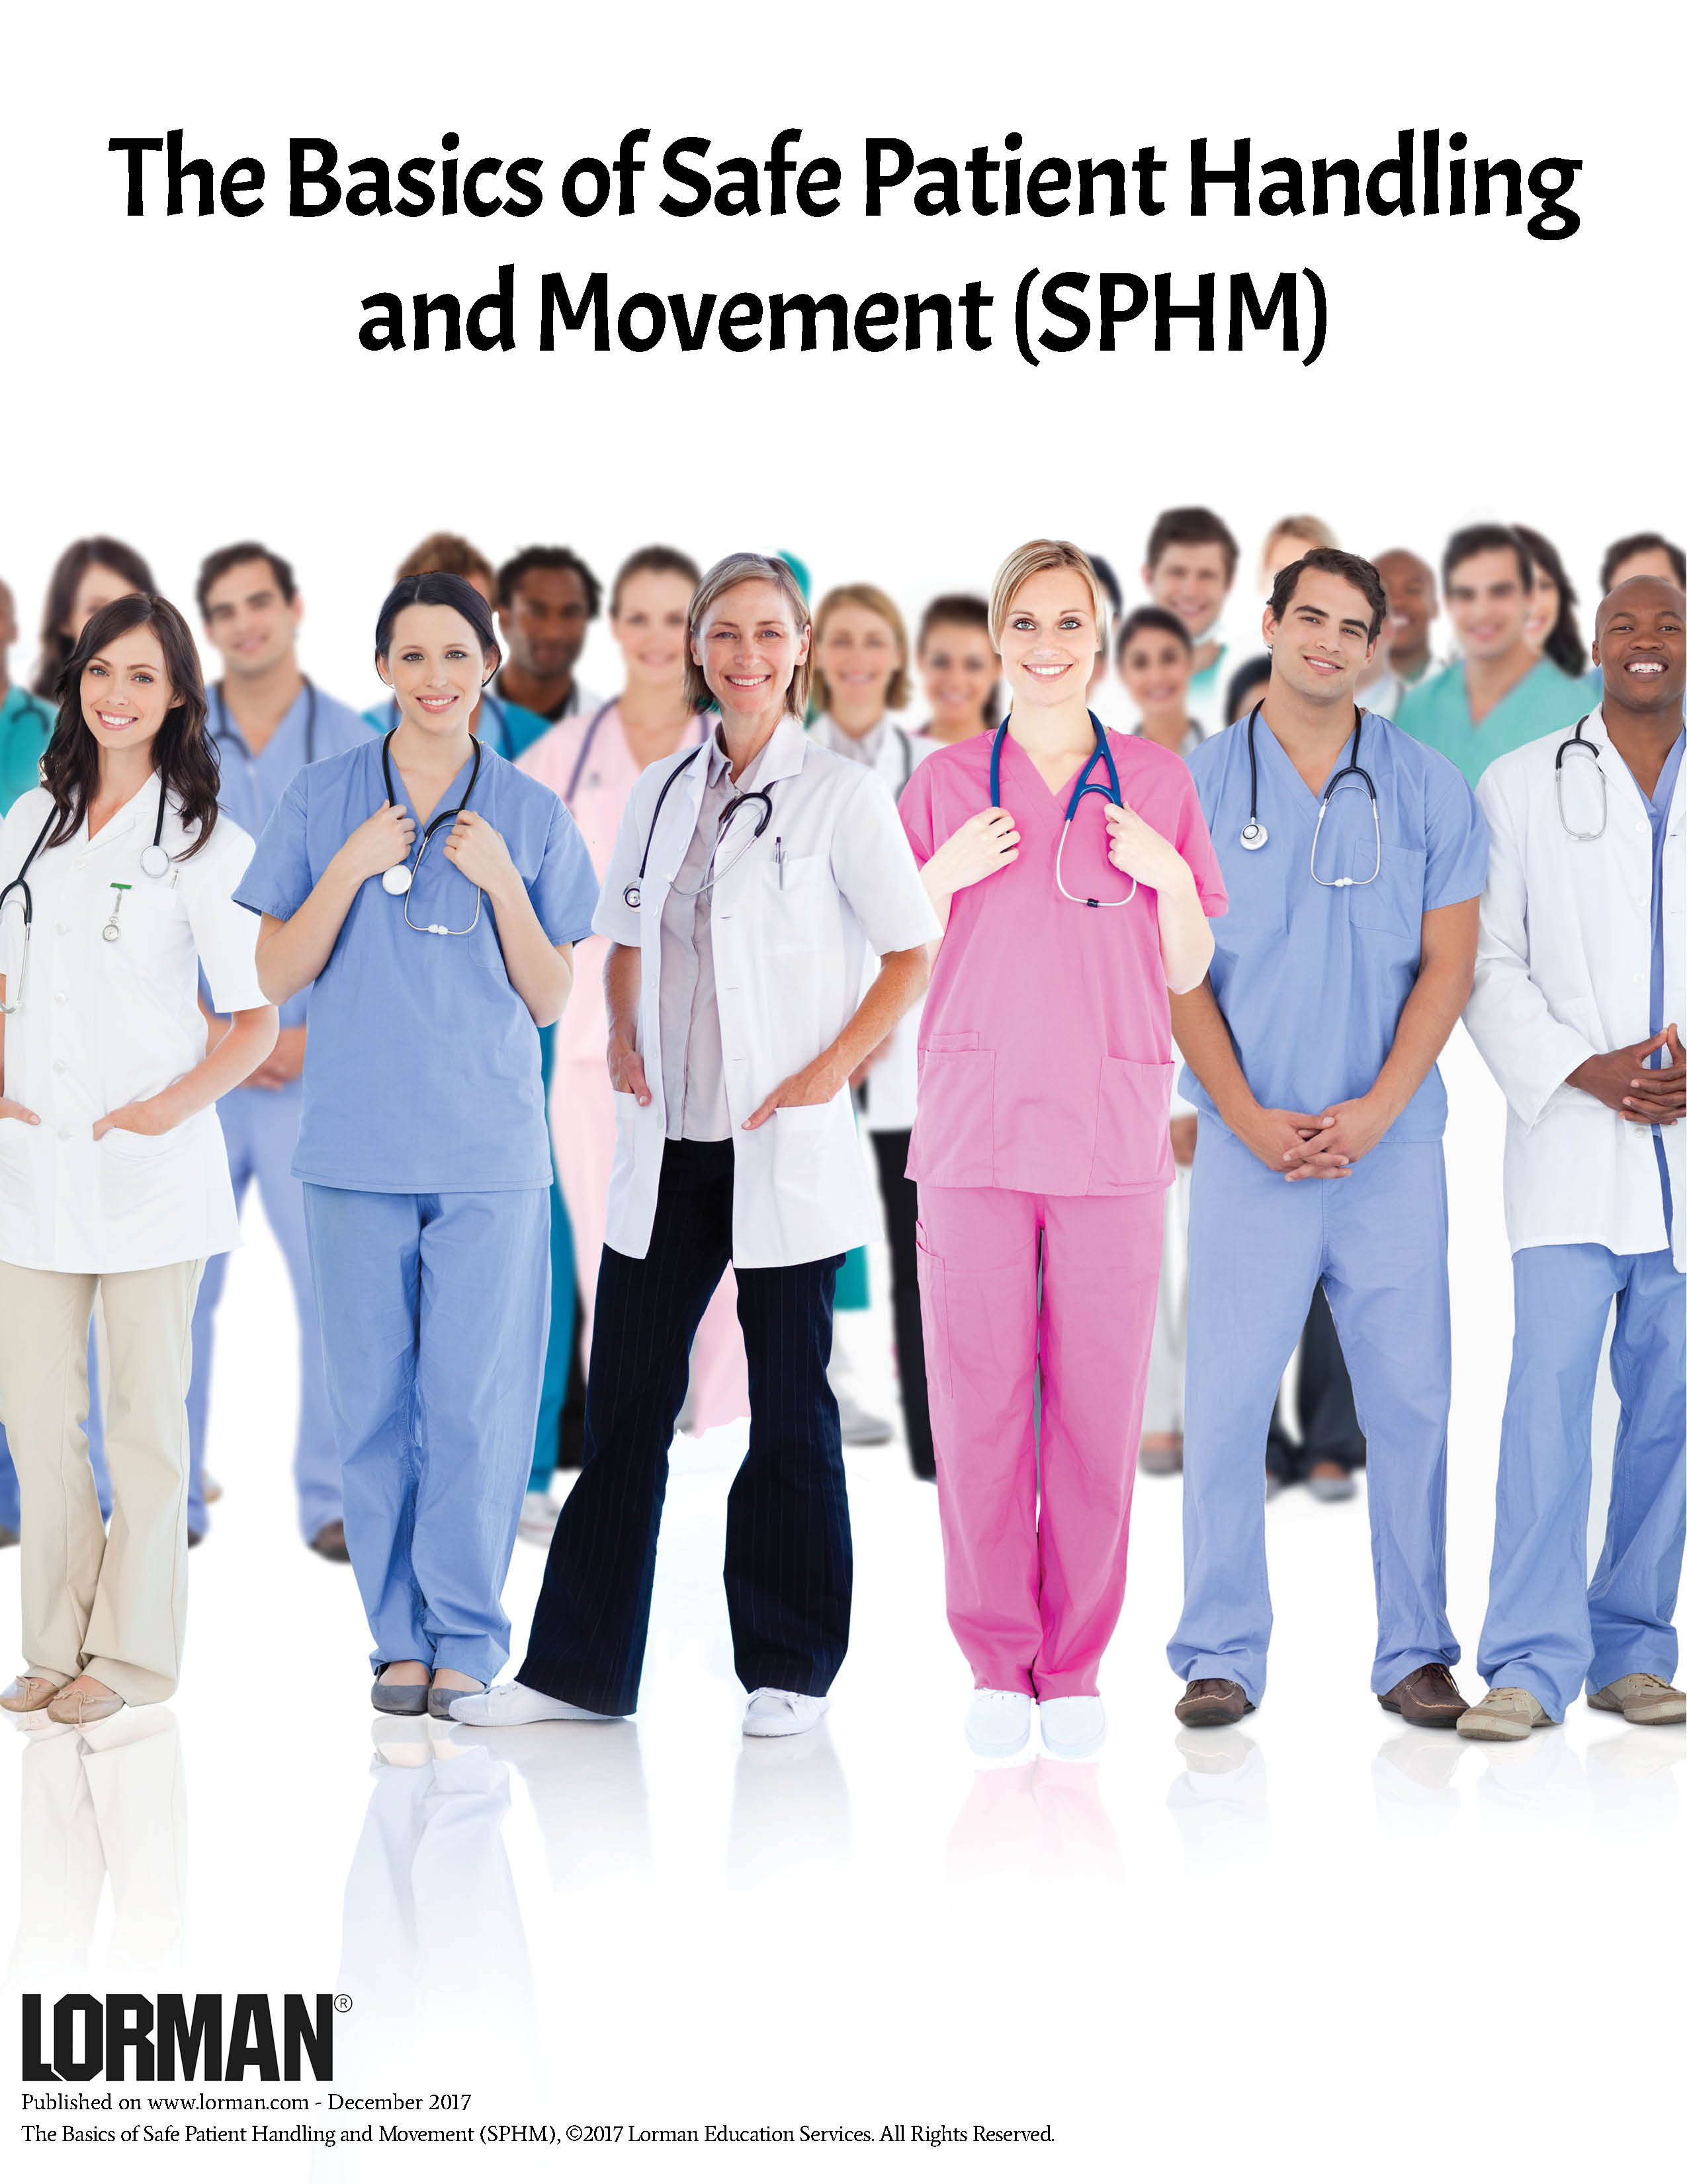 The Basics of Safe Patient Handling and Movement (SPHM)